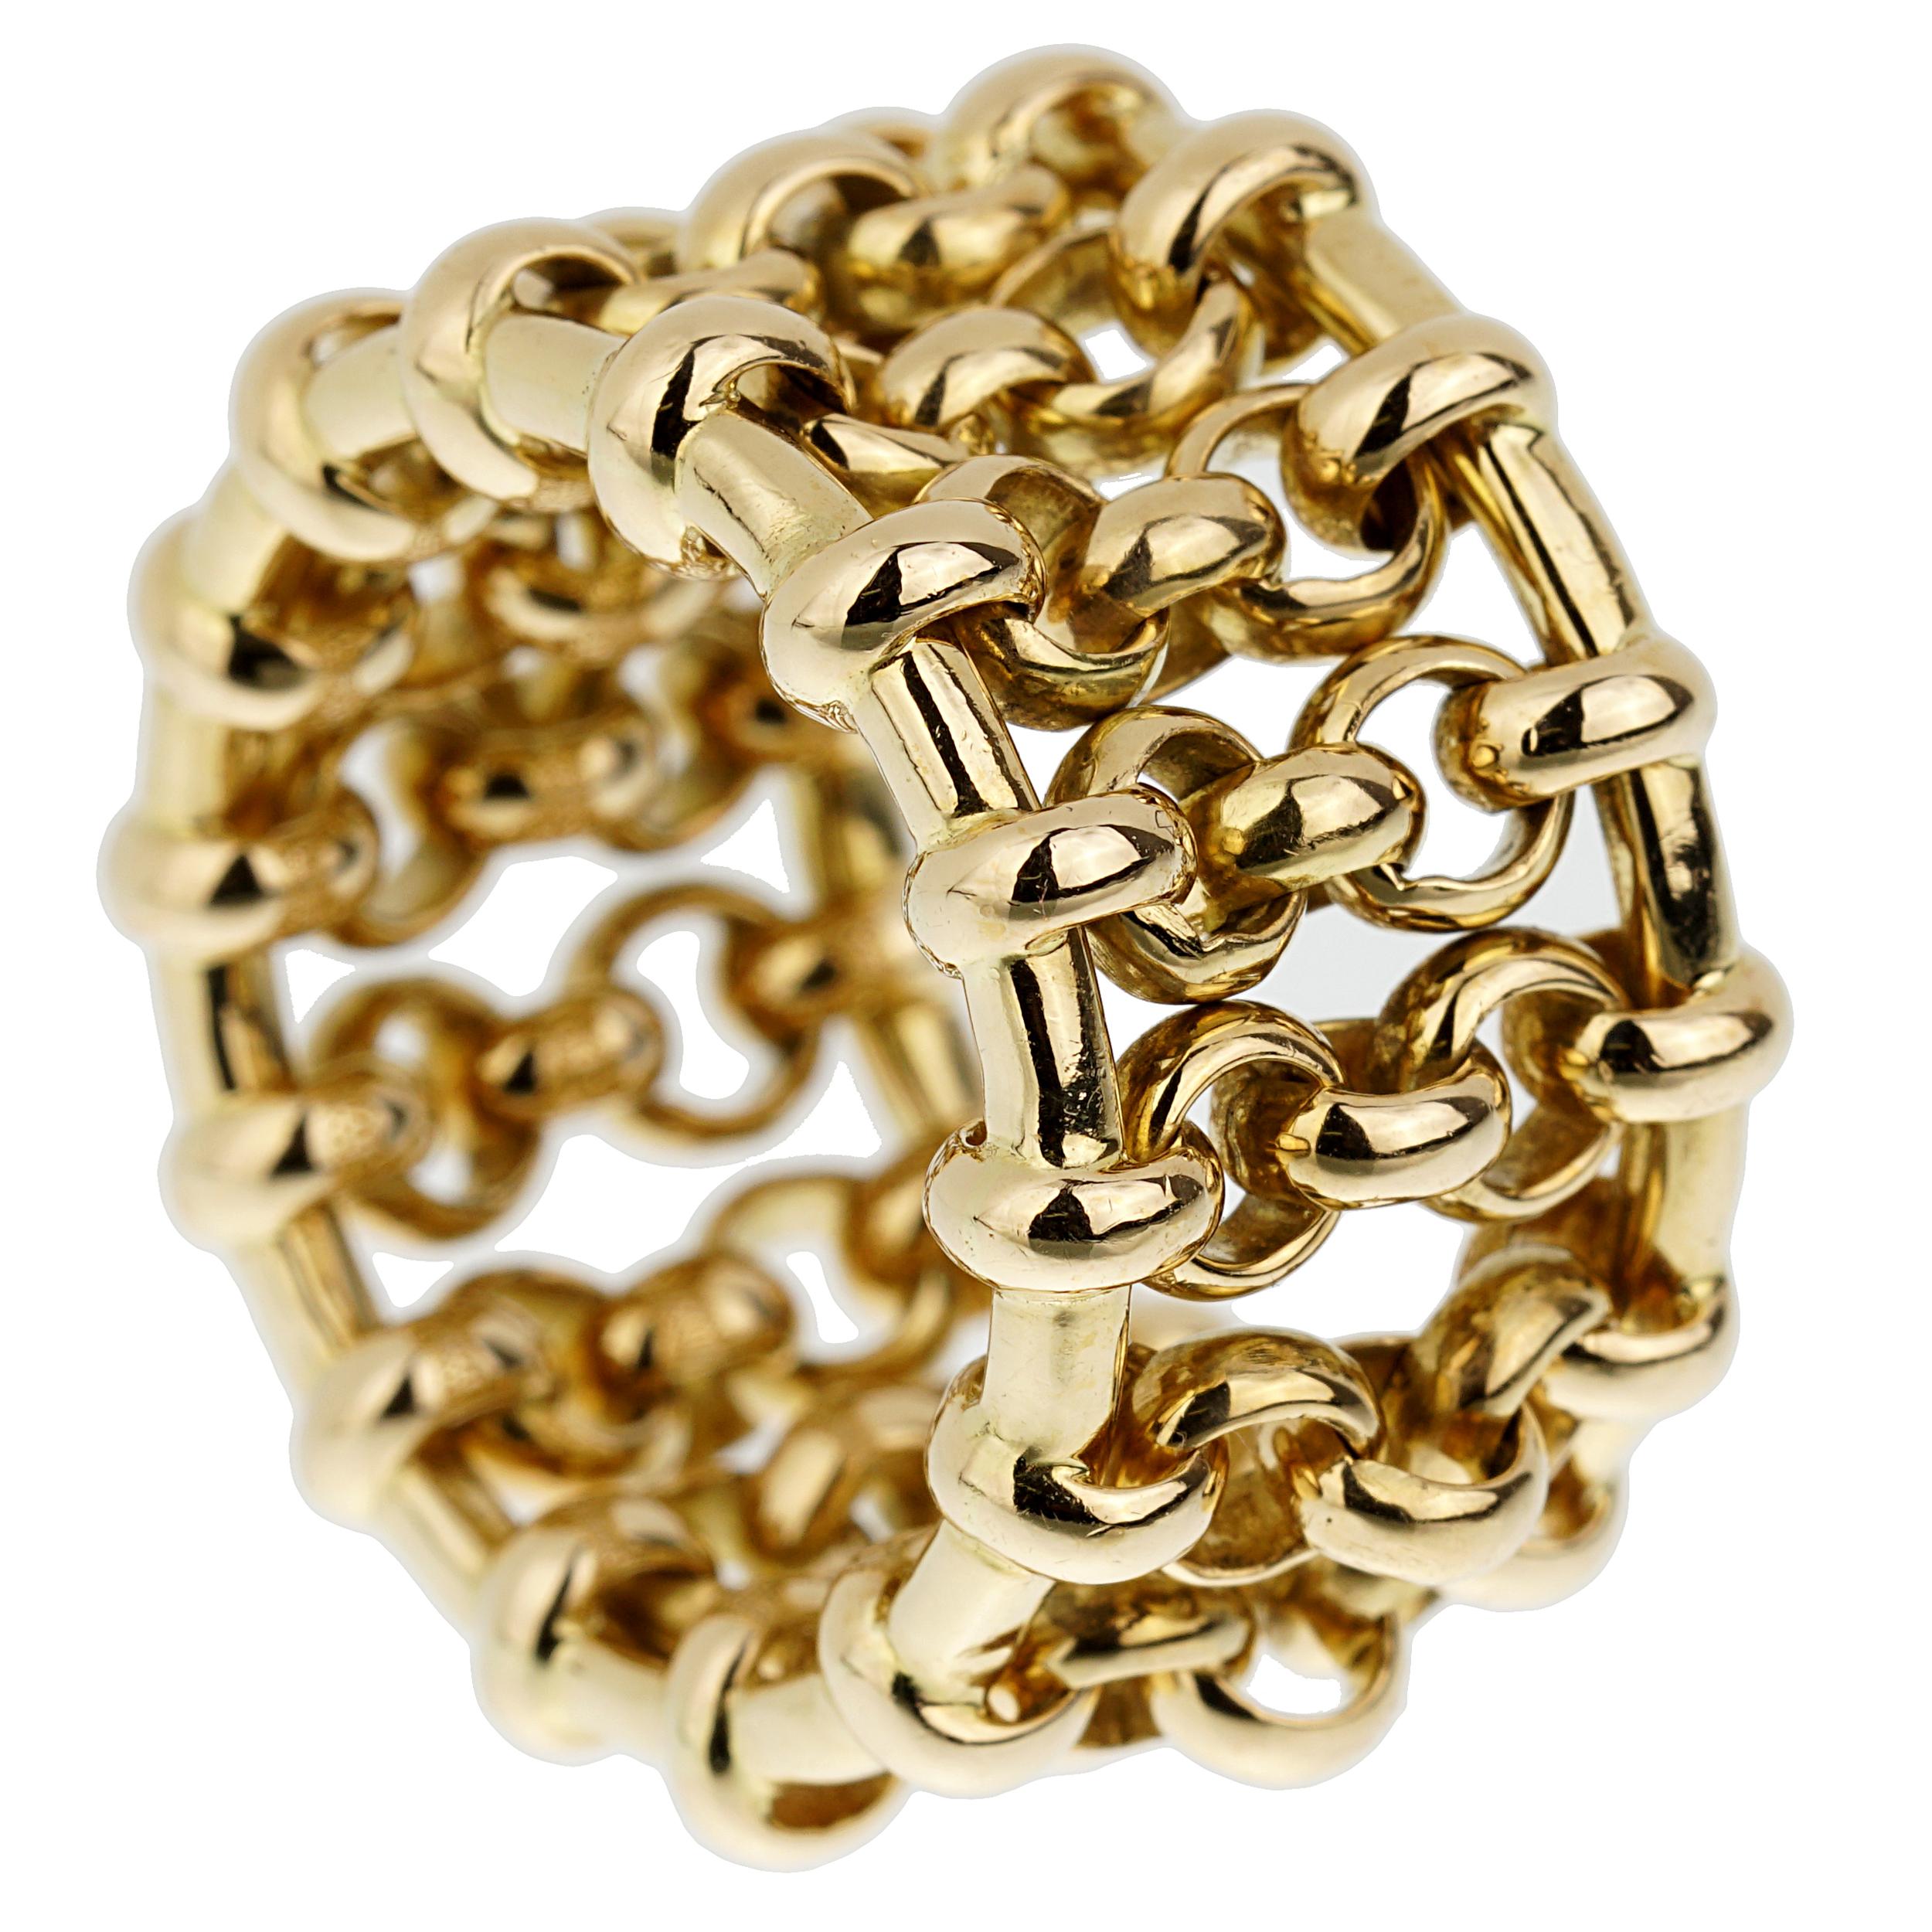 A chic Chanel ring circa 1990s showcasing a chain link motif crafted in 18k yellow gold, the ring measures .55